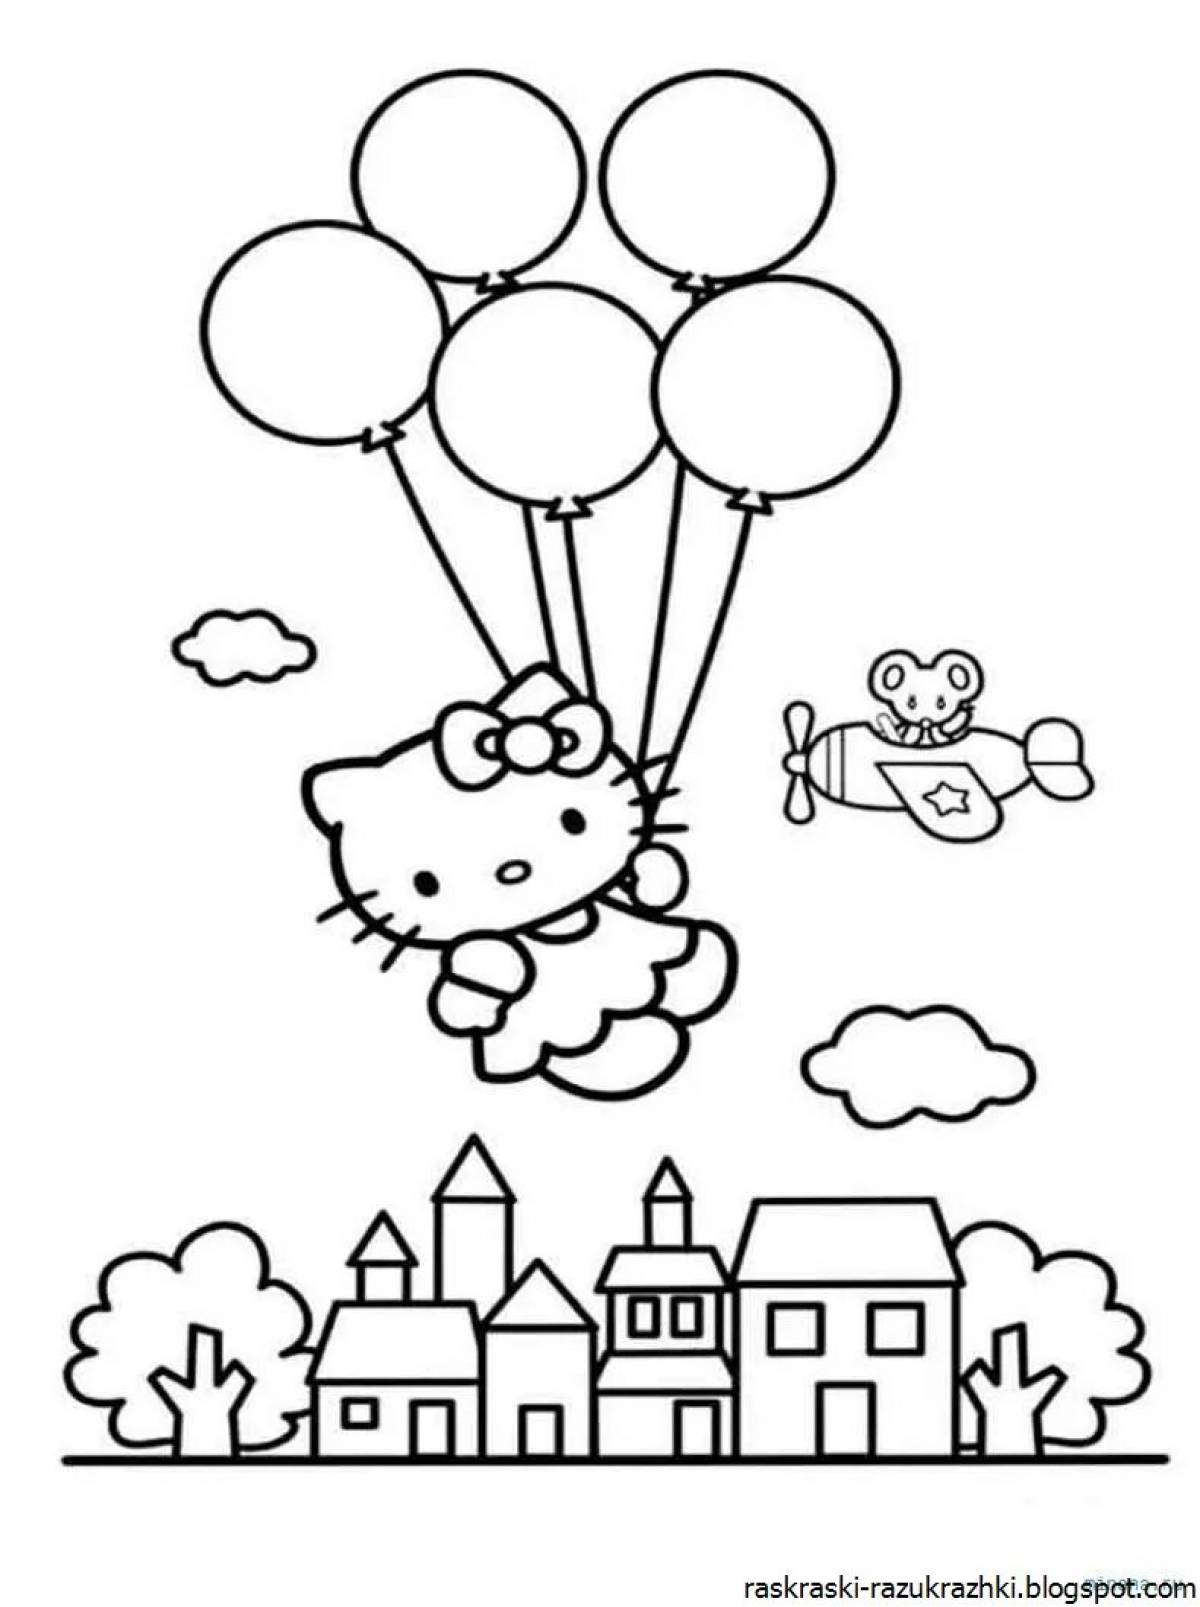 Cat with balloons #6